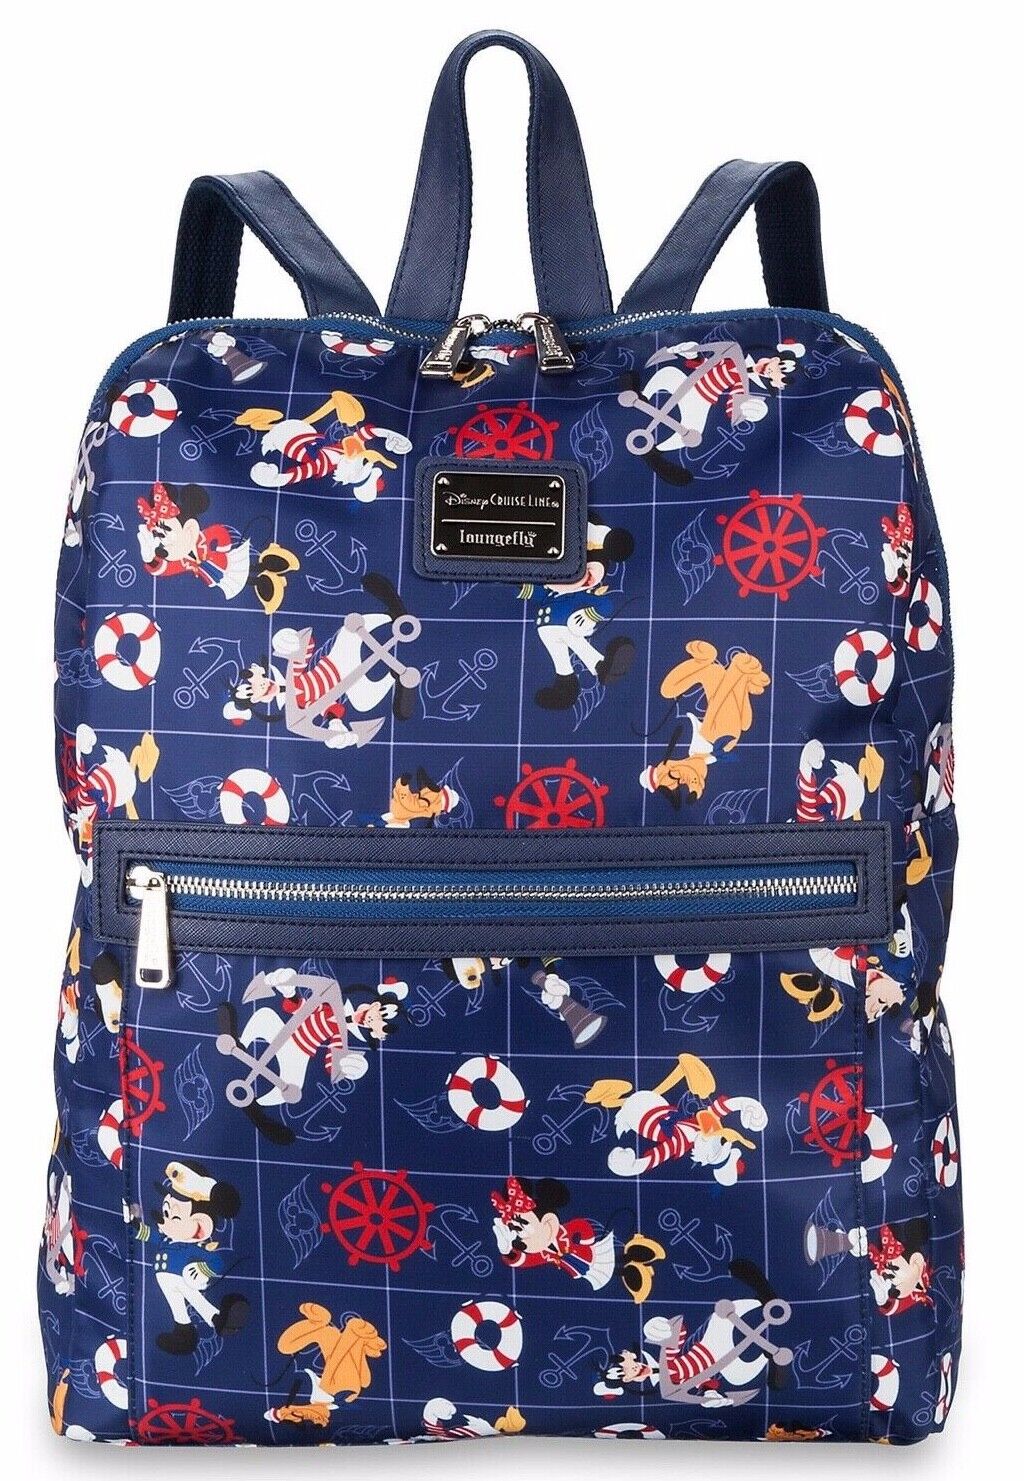 NWT Loungefly DISNEY CRUISE LINE Mickey Mouse & Friends Full-Size Backpack Parks